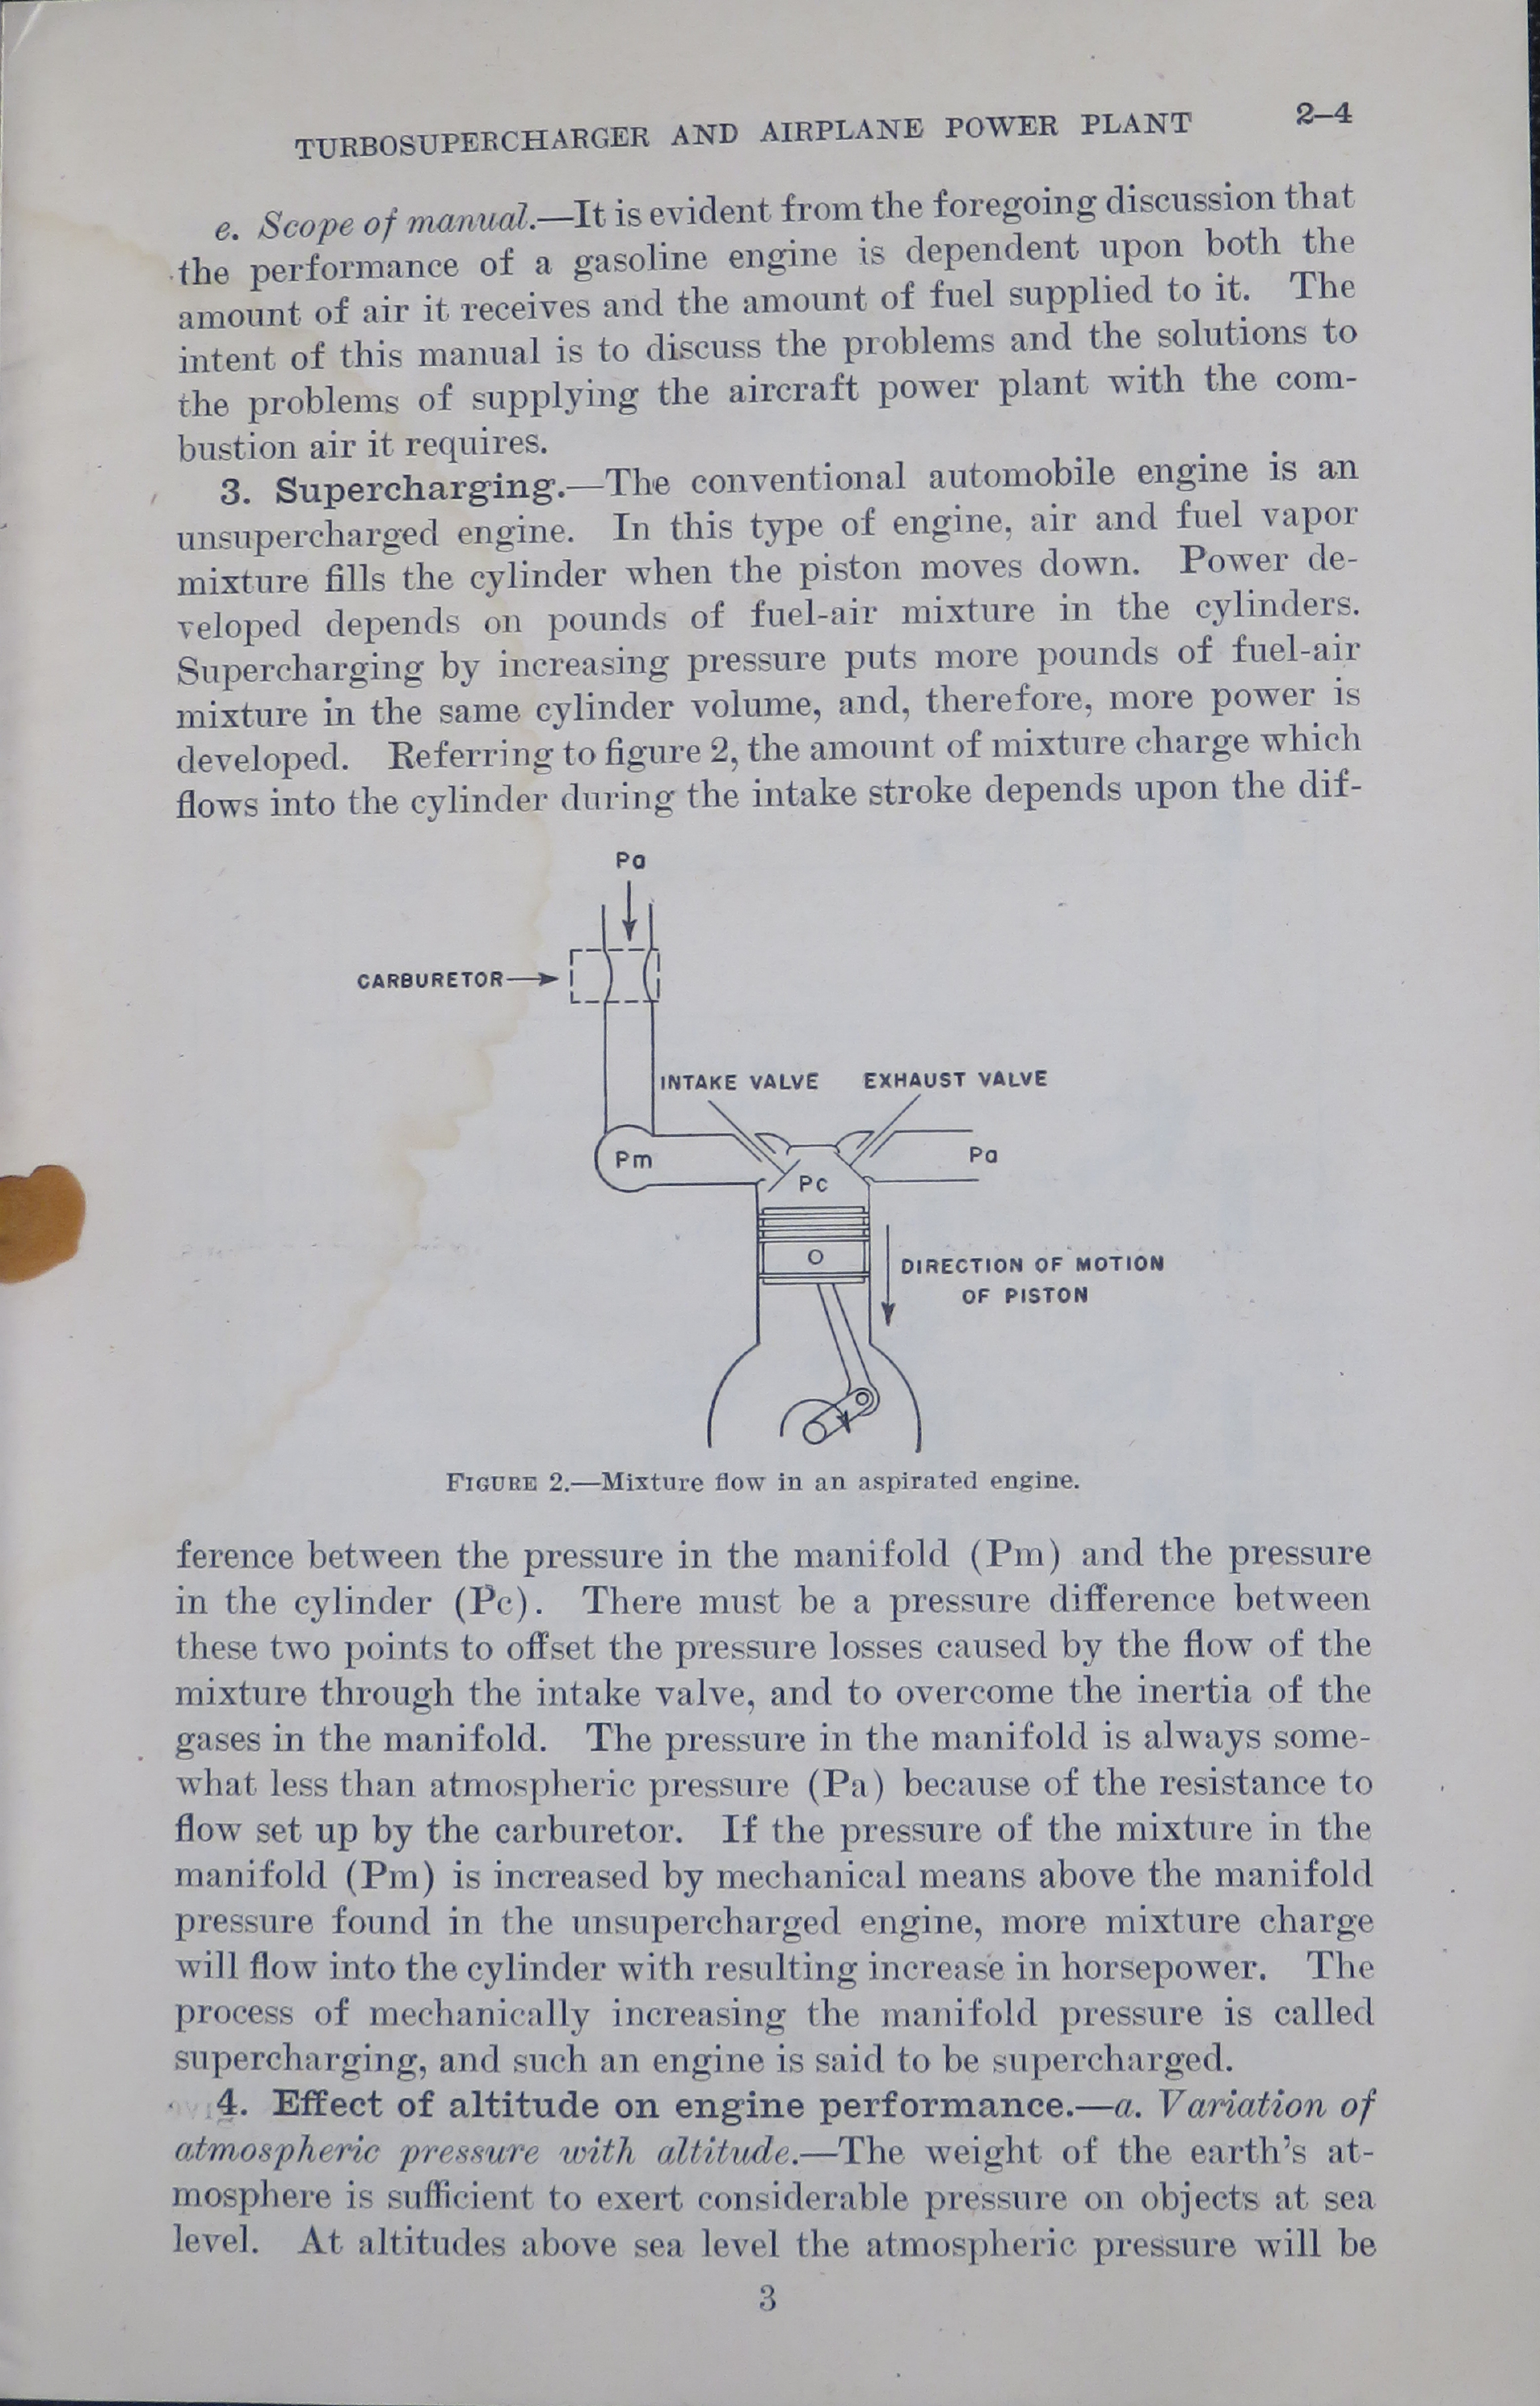 Sample page 5 from AirCorps Library document: Ordnance Maintenance; Turbosupercharger and Airplane Power Plant